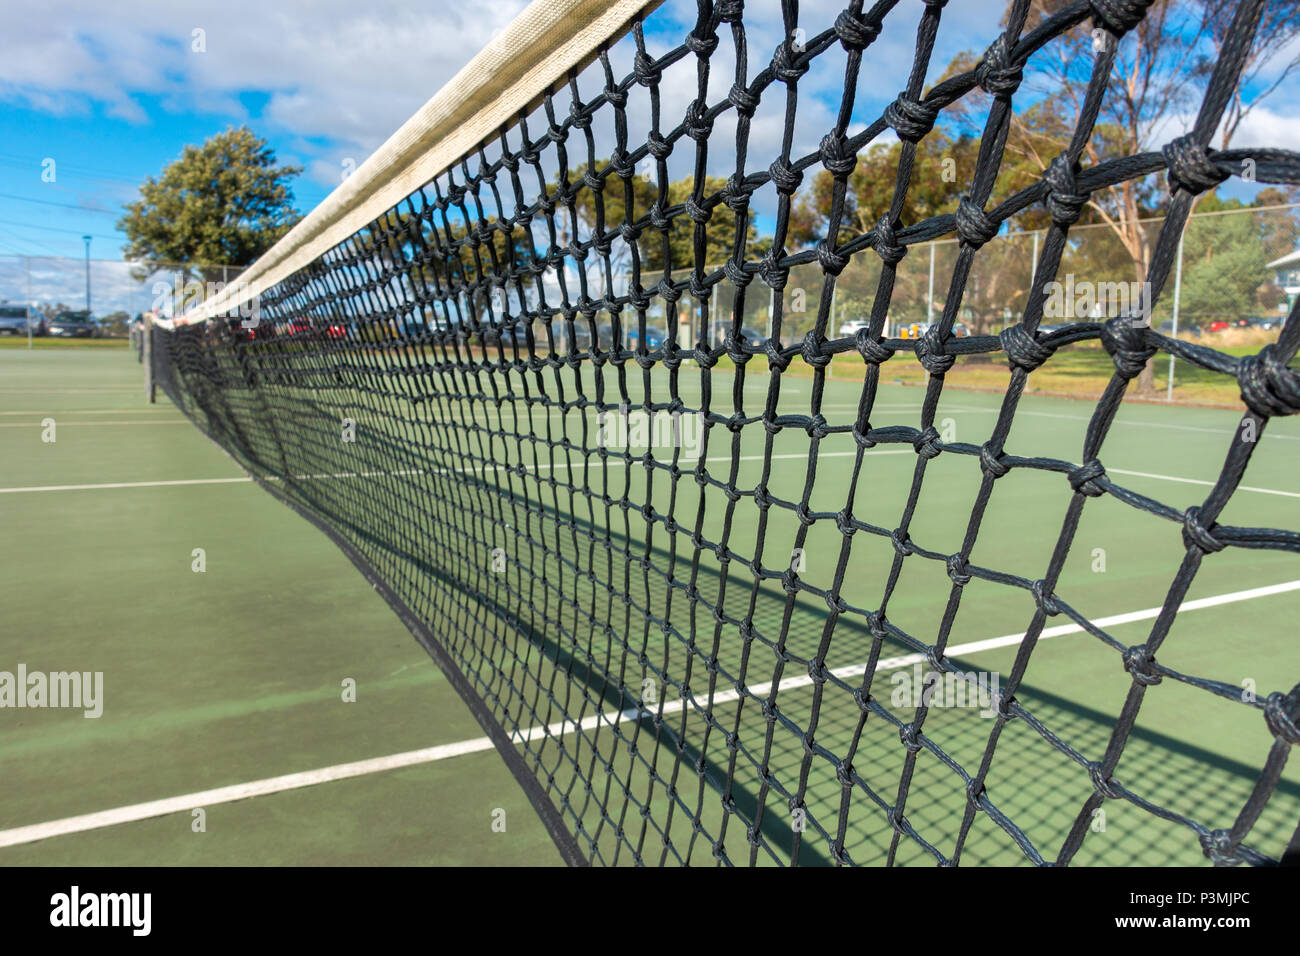 Net in free tennis court in Footscray Park. Melbourne, VIC Australia Stock Photo